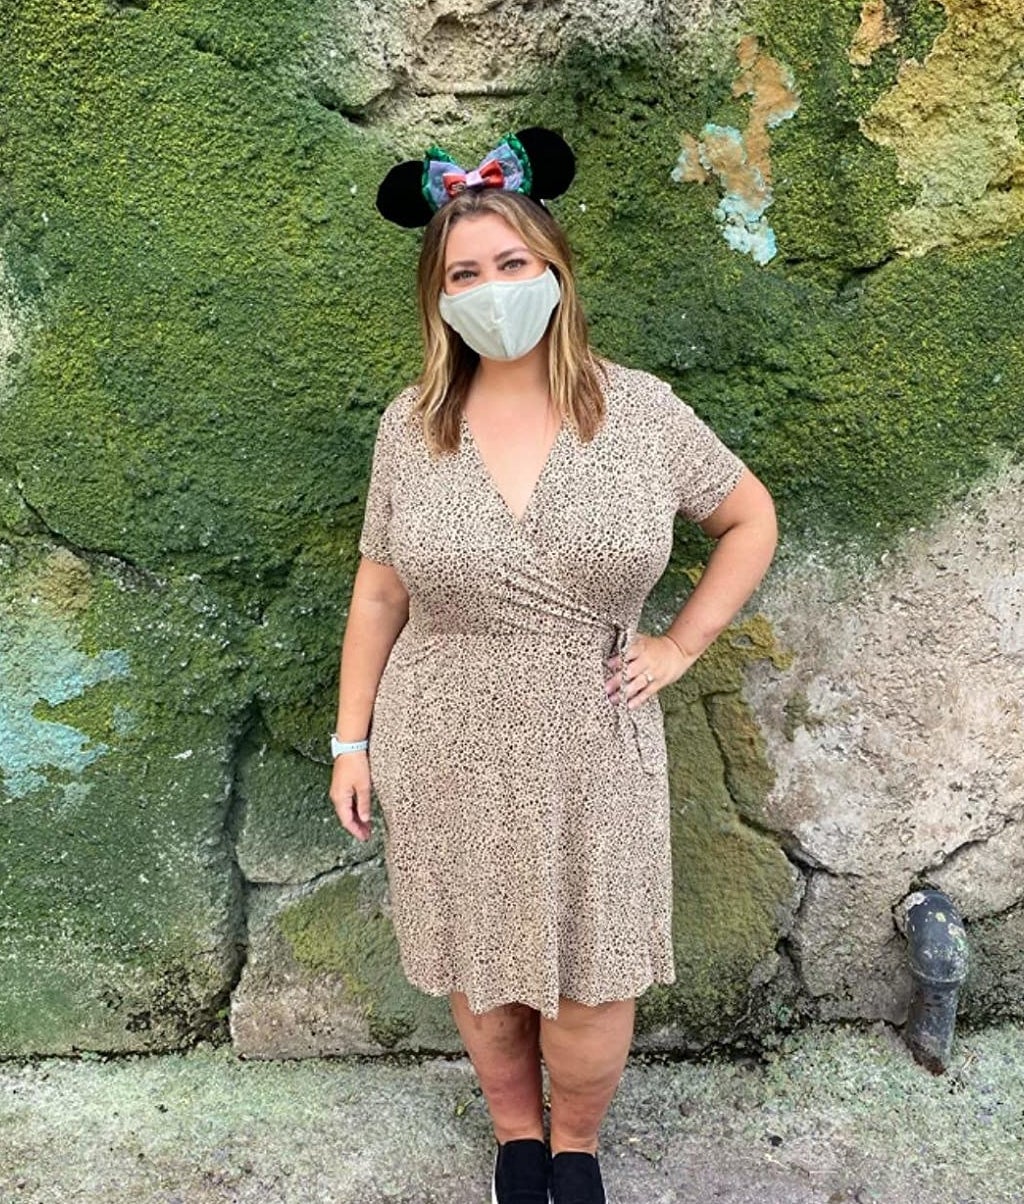 reviewer wearing the beige and black dress and mickey mouse ears